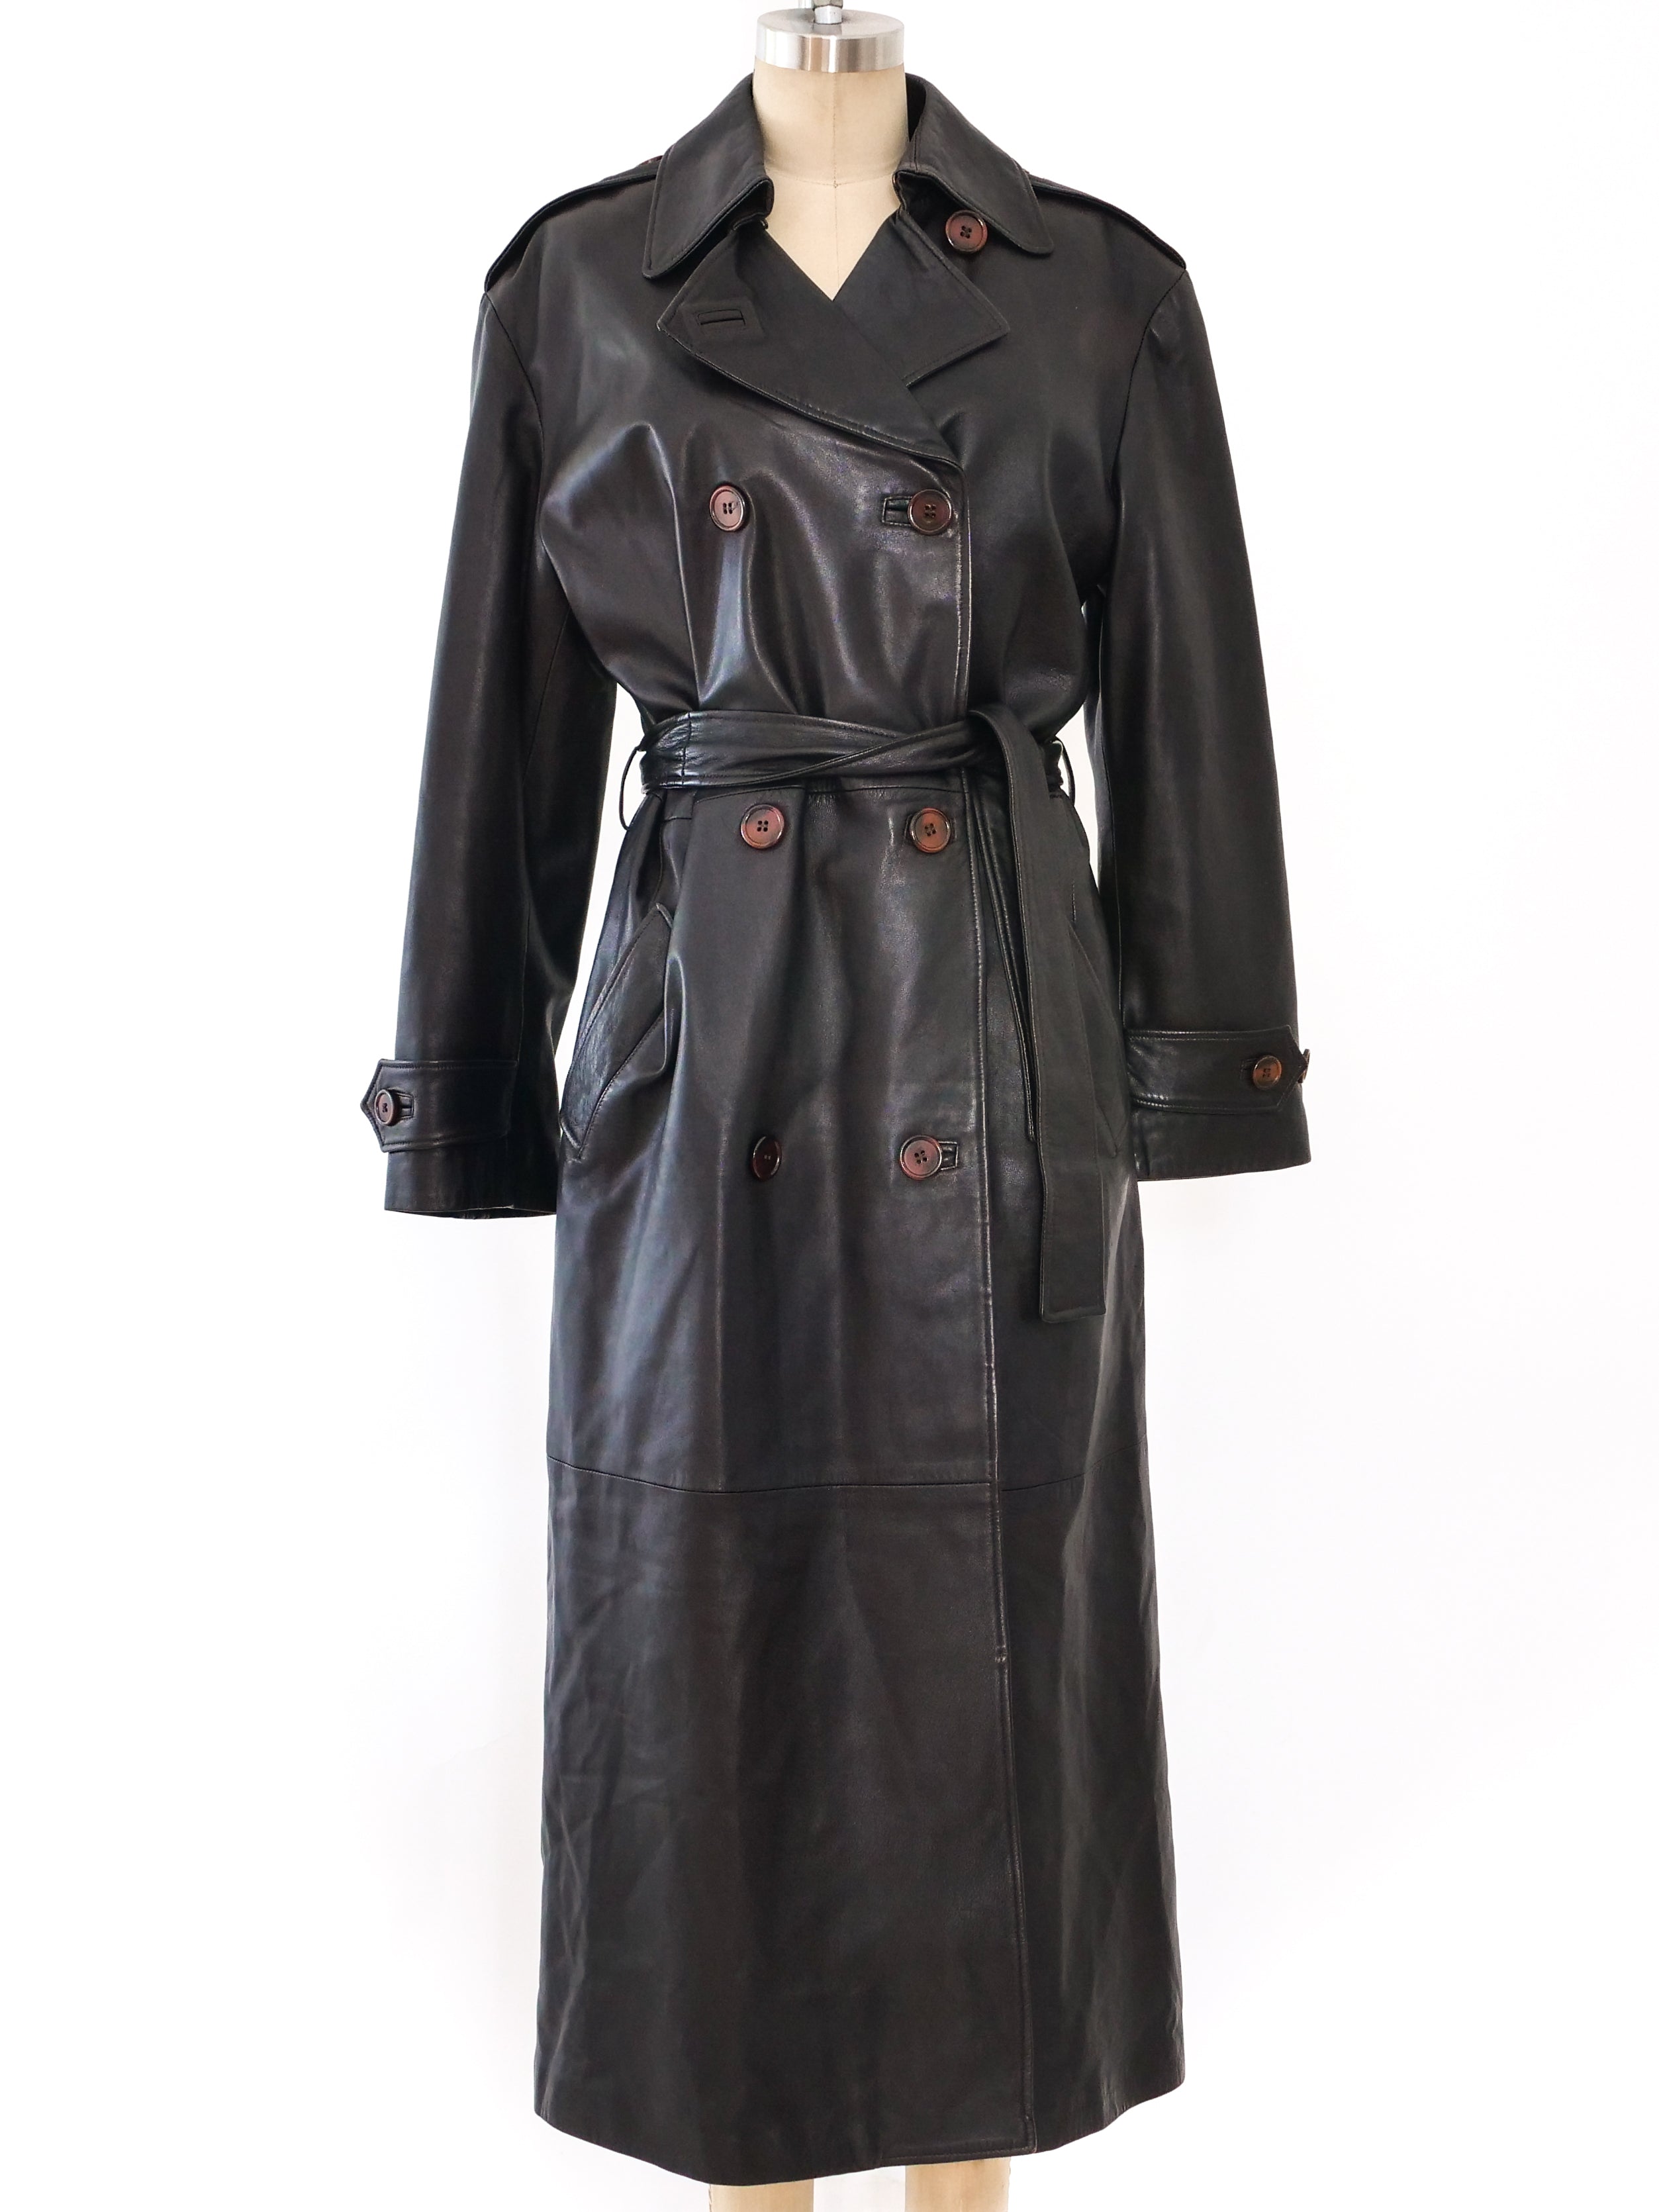 Gianni Versace Leather Trench Coat